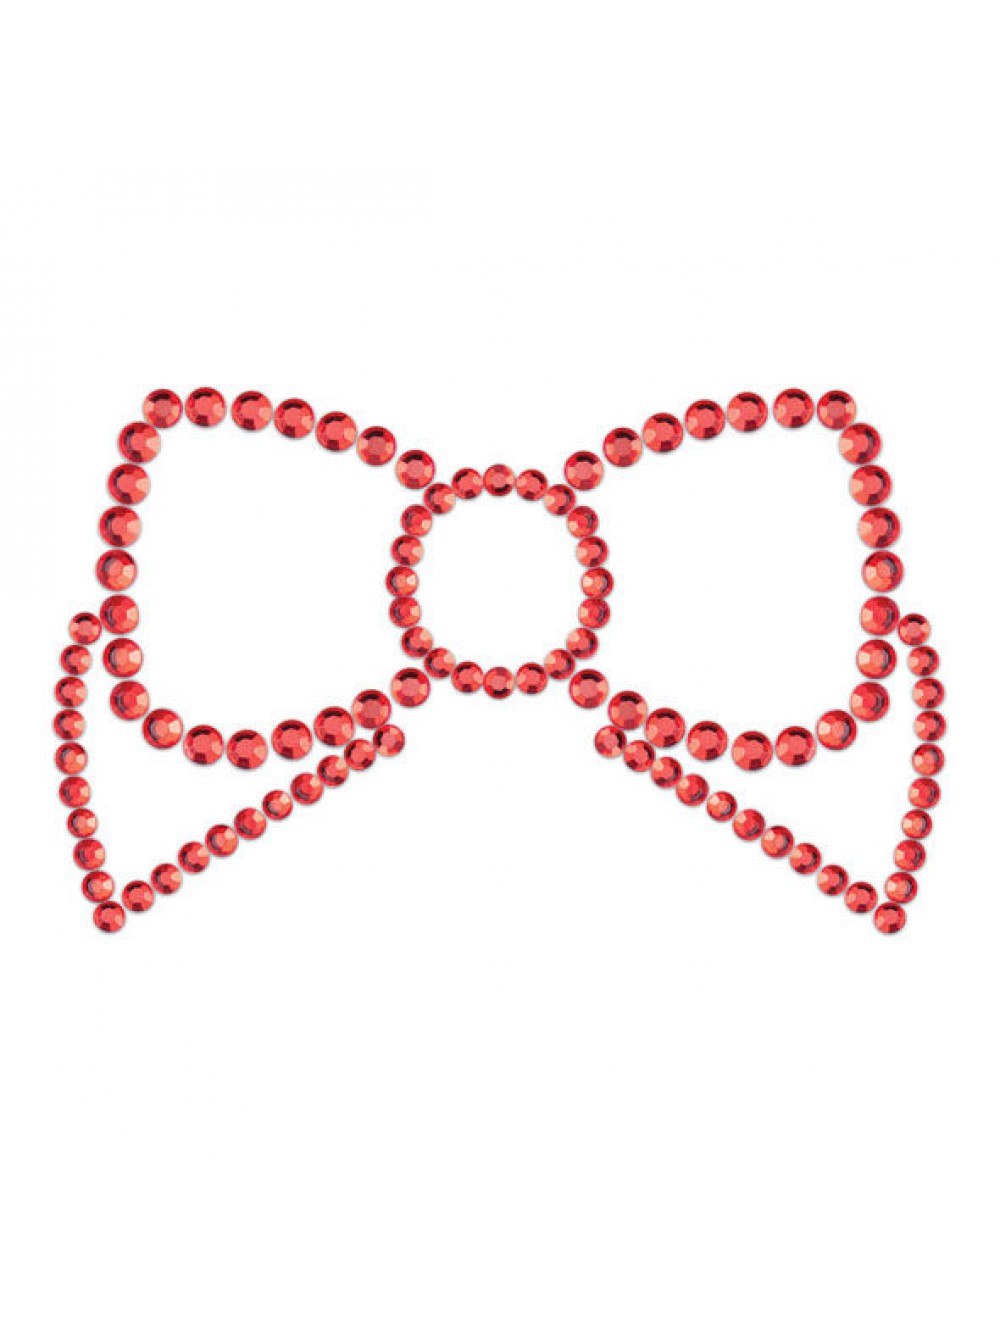 MIMI BOW COVERS RED 8437008001944